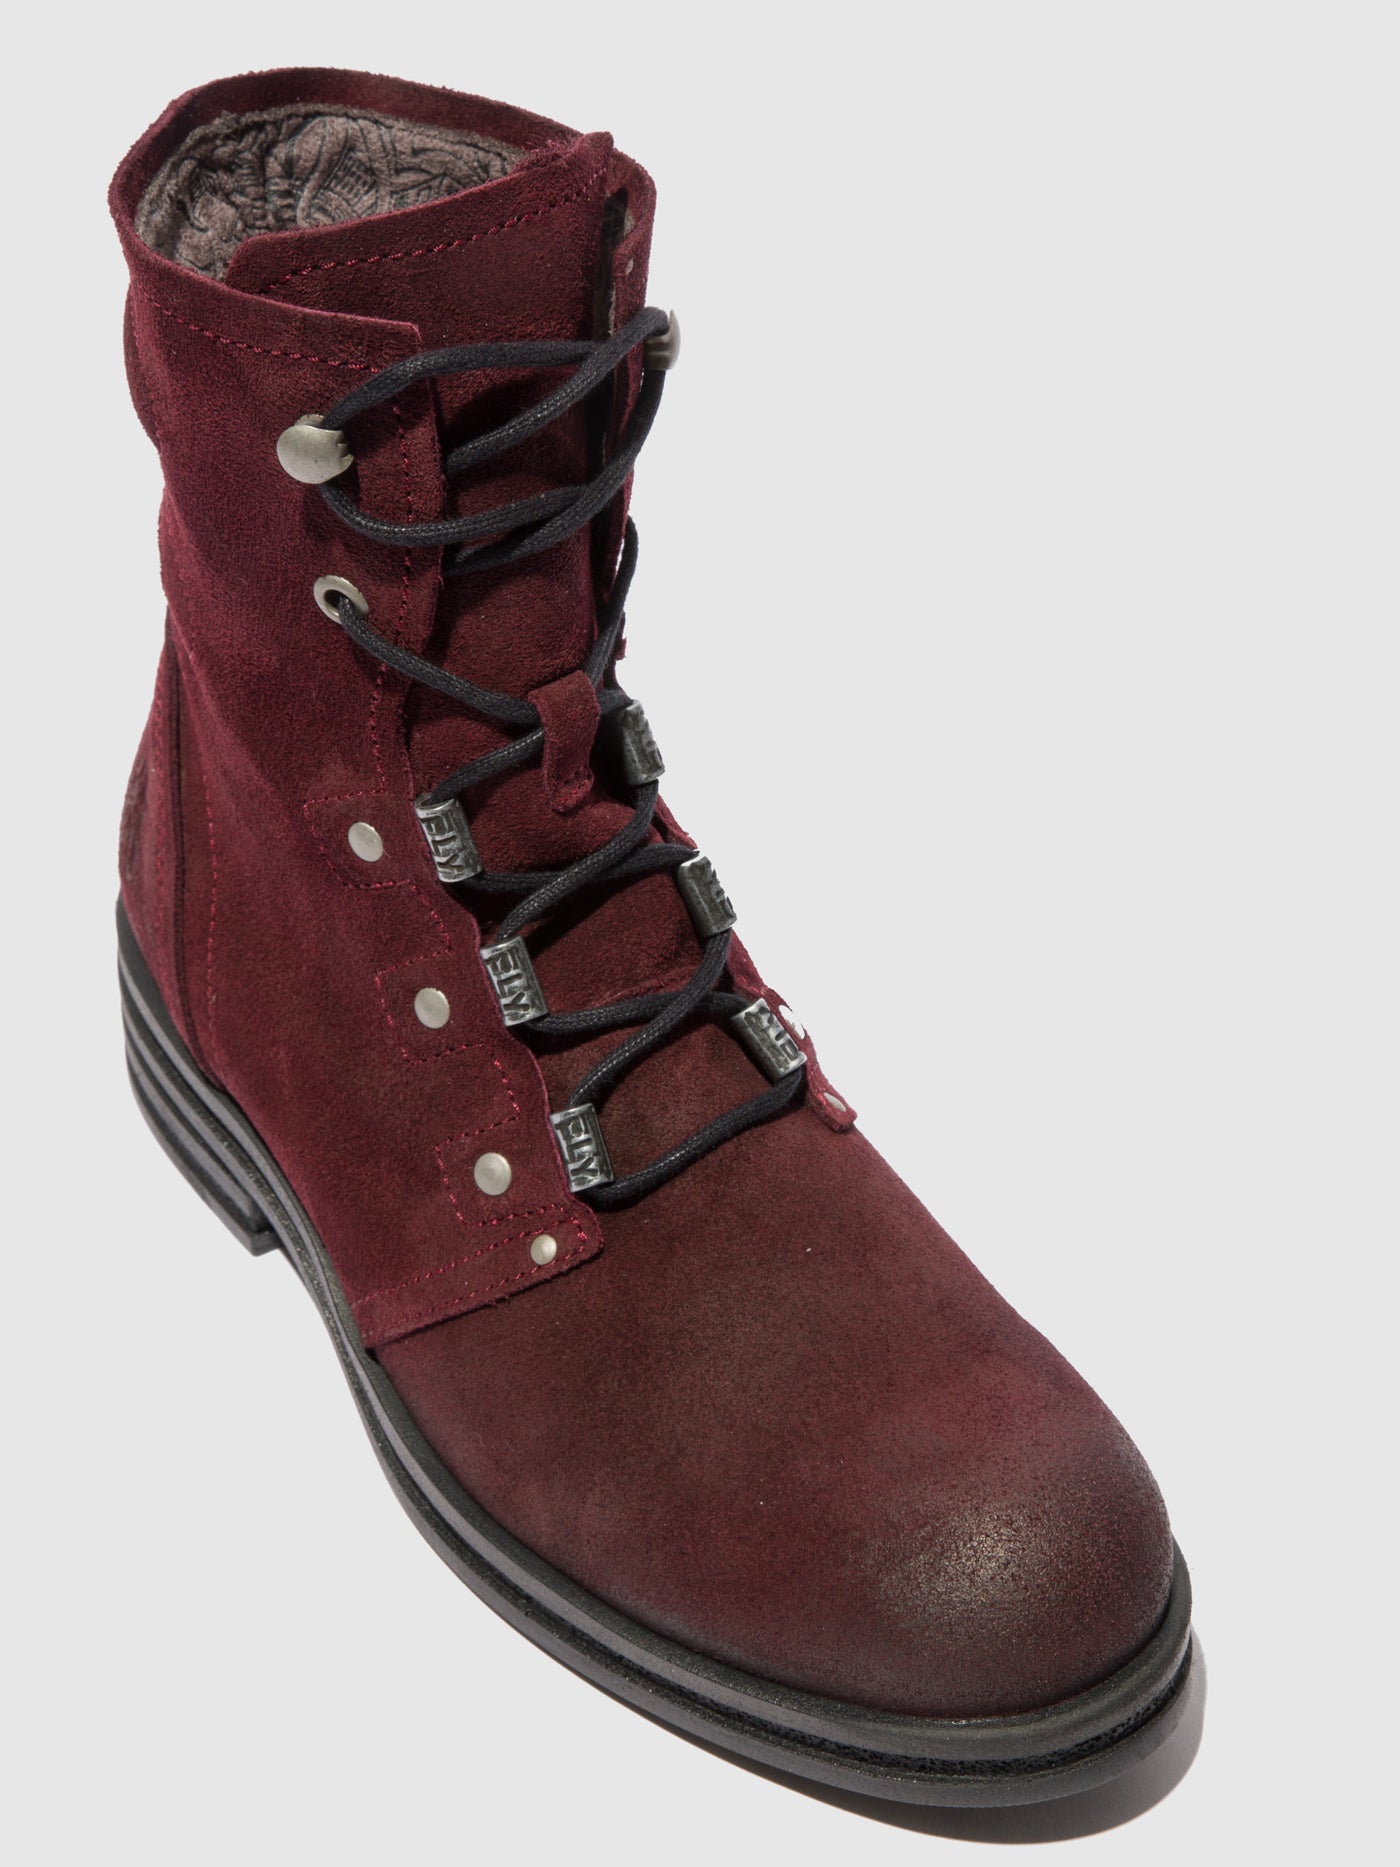 Lace-up Ankle Boots KNOT792FLY OILSUEDE WINE